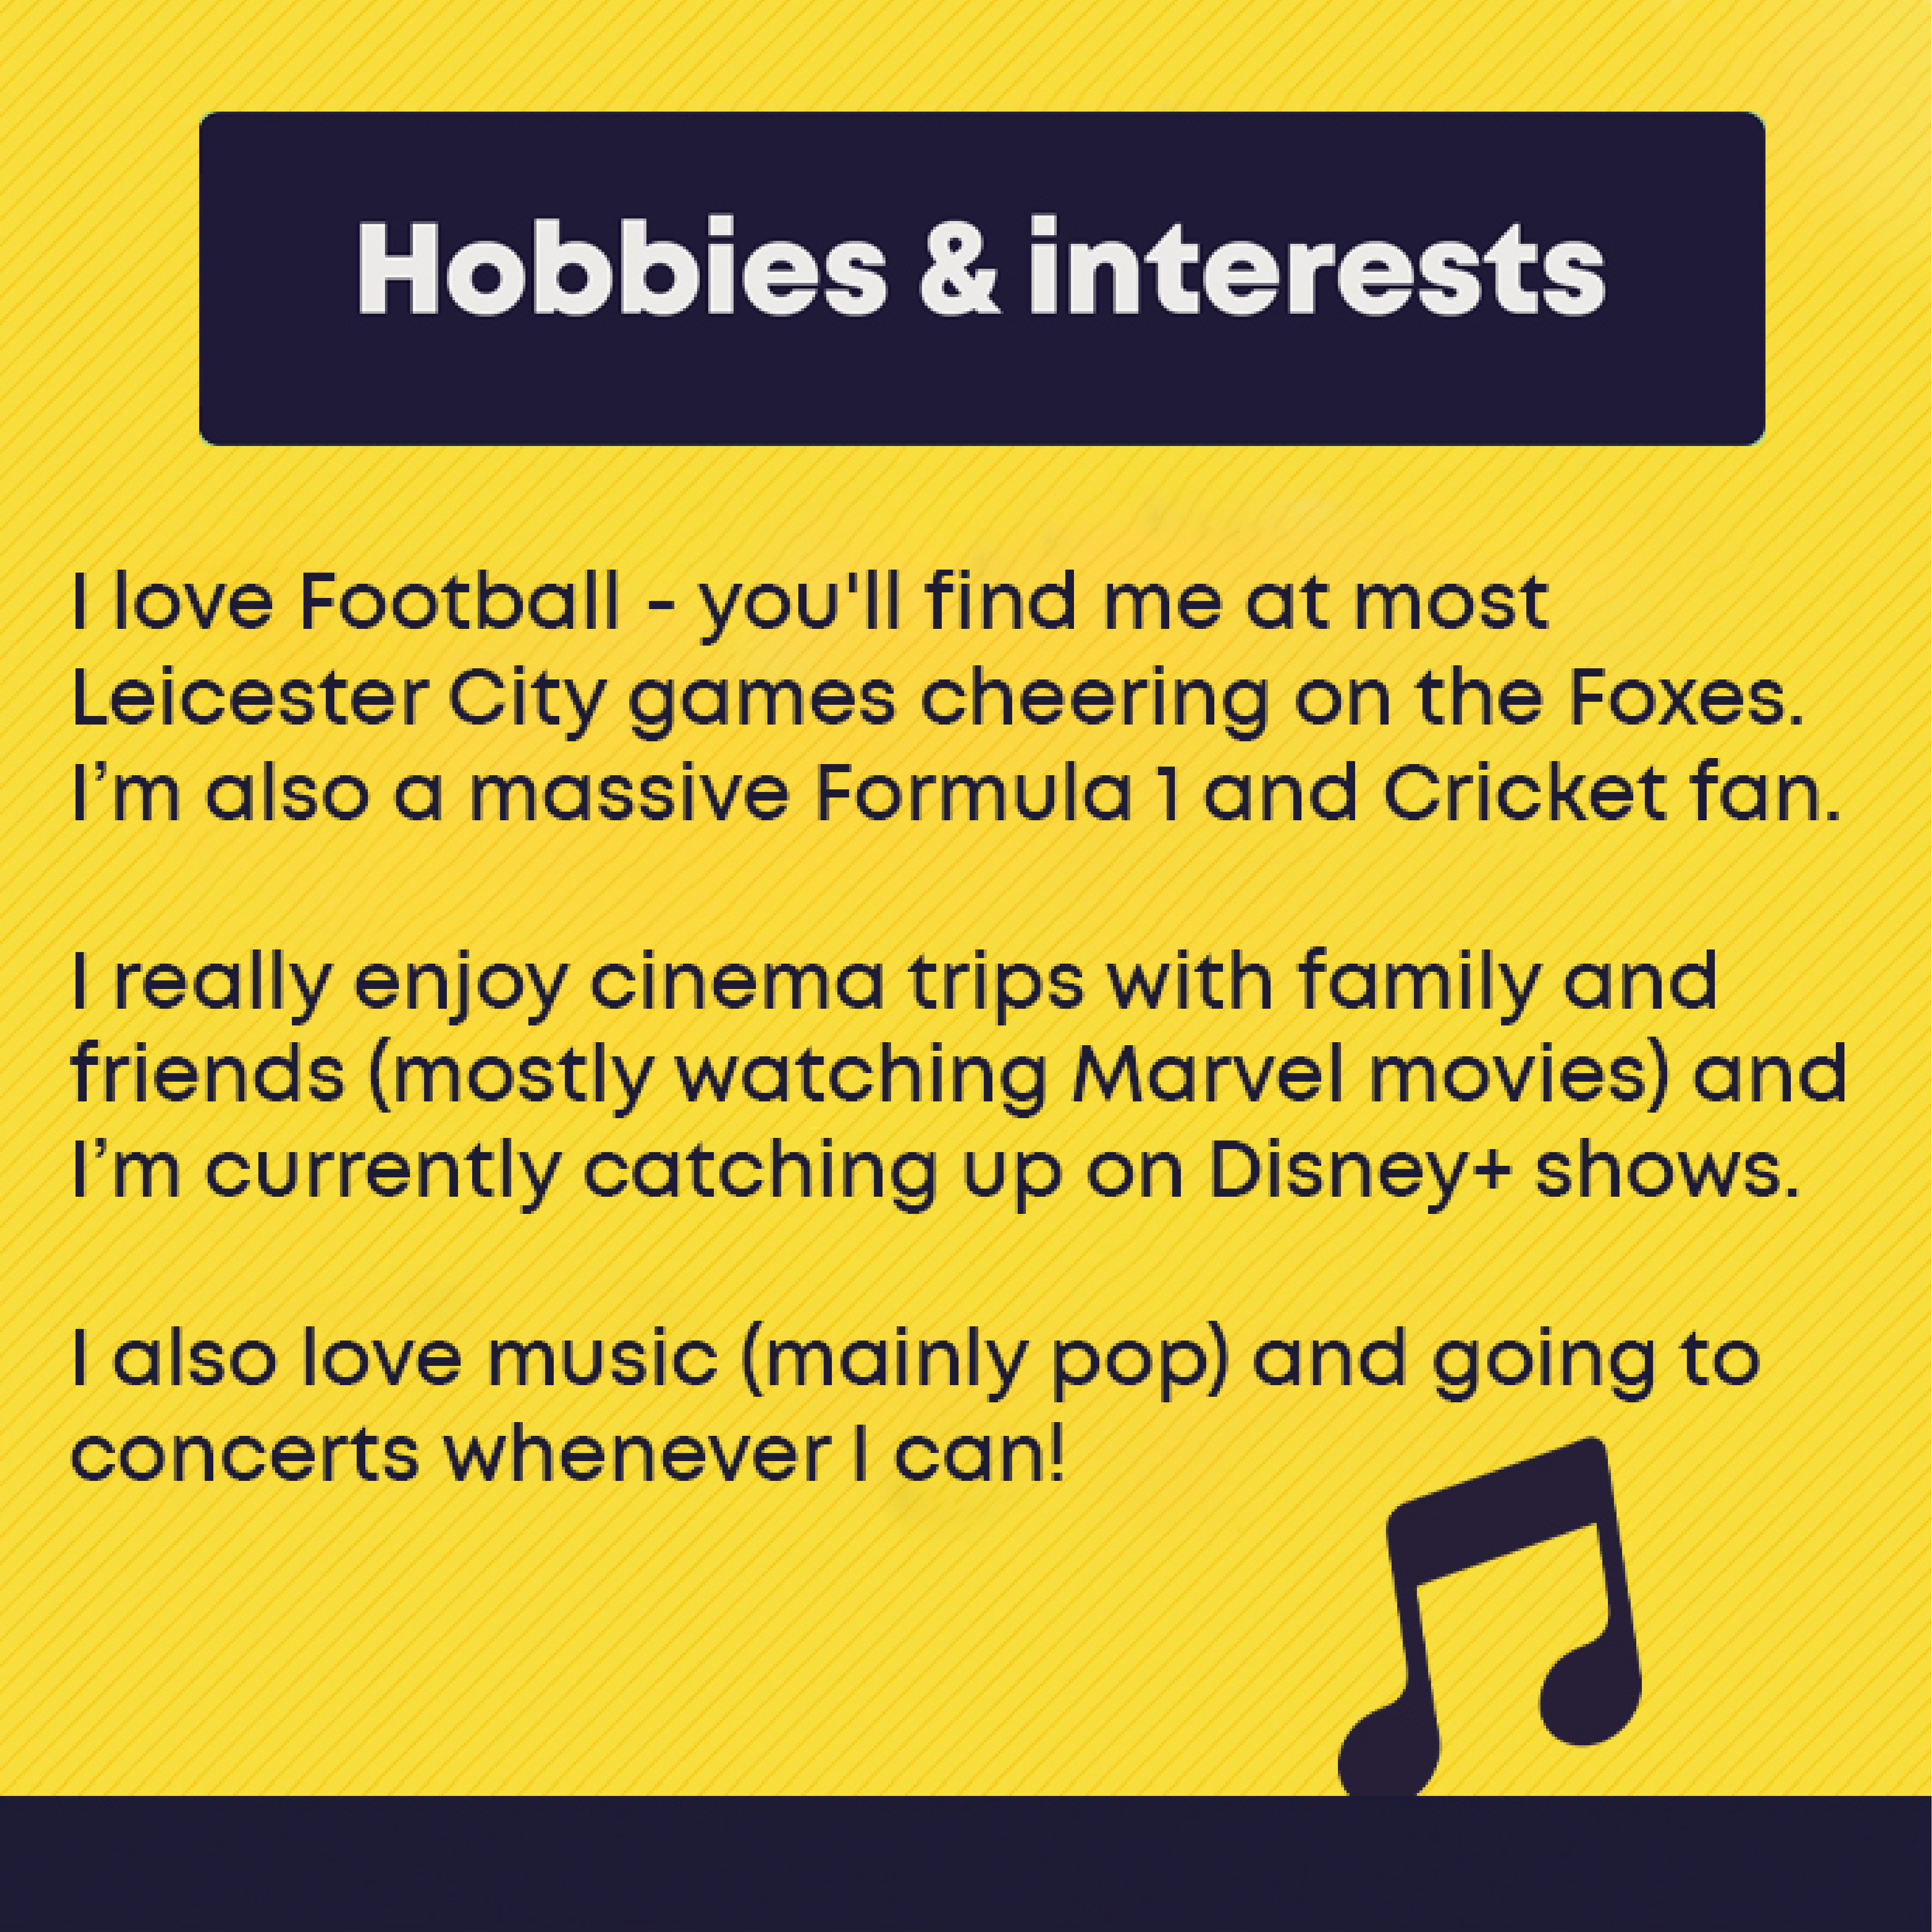 Hobbies and Interests: I love Football - you'll find me at most Leicester City games cheering on the Foxes. I’m also a massive Formula 1 and Cricket fan.   I really enjoy cinema trips with family and friends (mostly watching Marvel movies) and I’m currently catching up on Disney+ shows.   I also love music (mainly pop) and going to concerts whenever I can! 